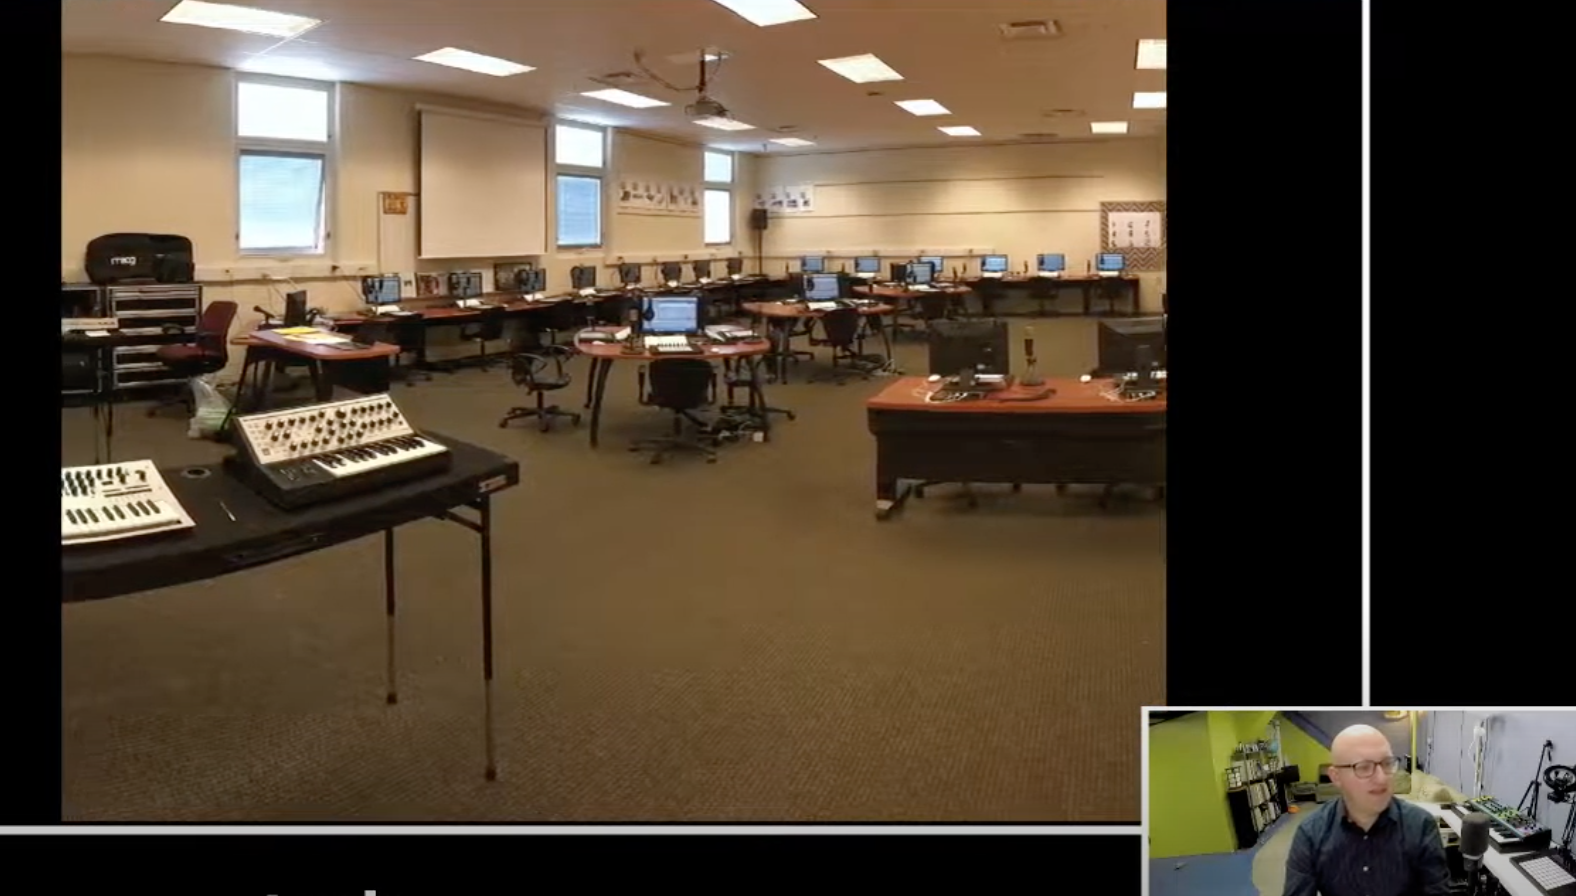 Live Streaming Your Music Class: Equipment, Software, and Strategies